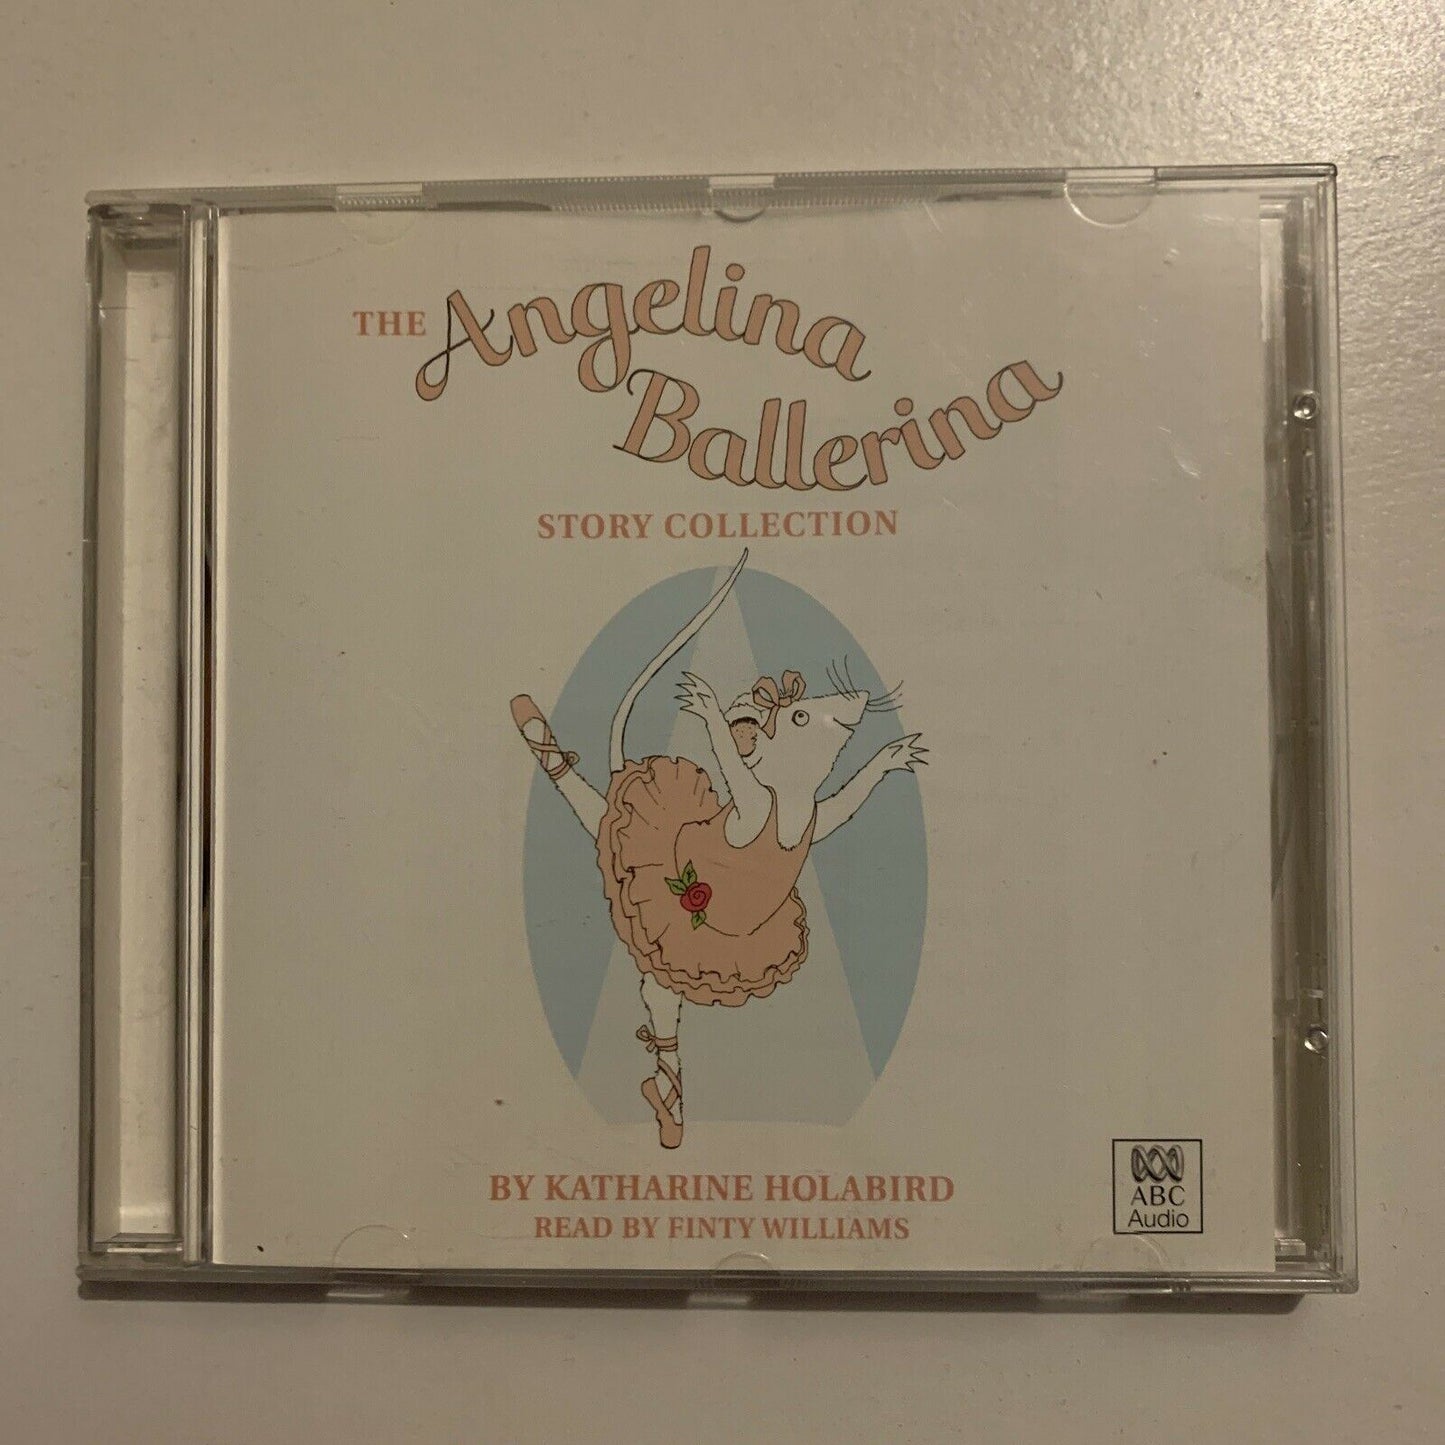 The Angelina Ballerina Story Collection (Audio CD, 2003)